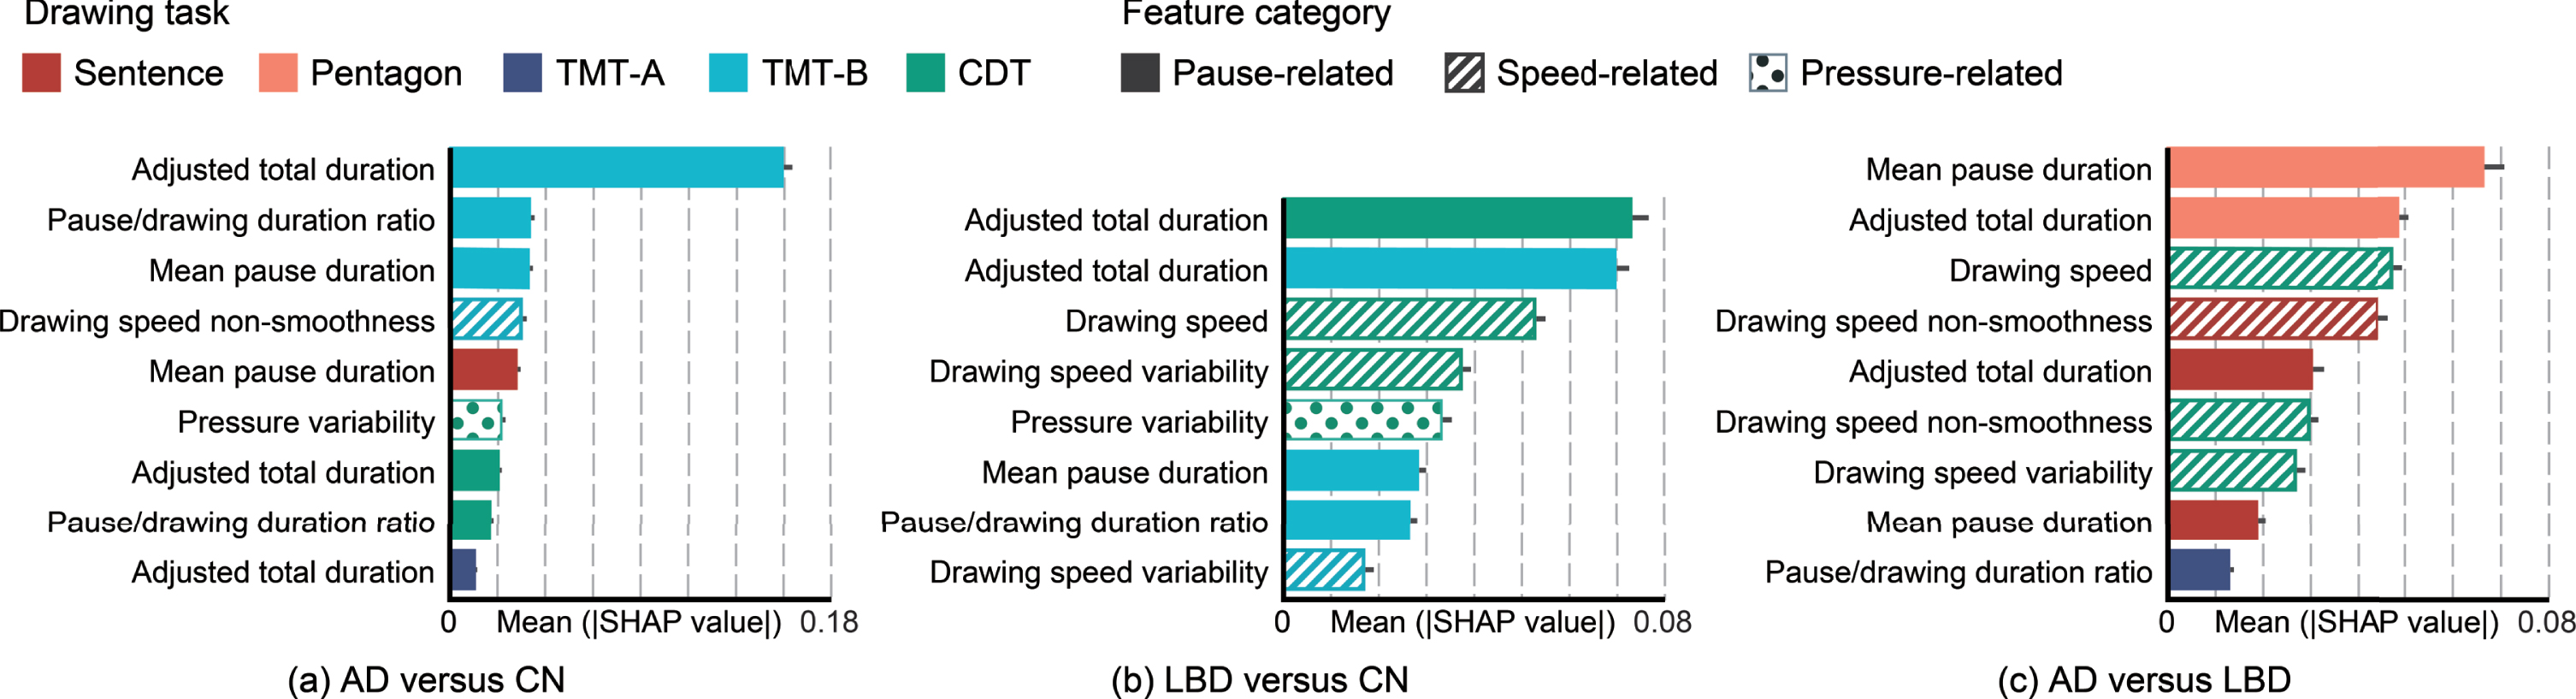 Comparison of the features’ importance in the classification models by drawing task and feature categories. Each plot presents the mean absolute SHAP value with a 95% confidence interval. AD, Alzheimer’s disease; LBD, Lewy body disease; CN, cognitively normal; SHAP, SHapley Additive exPlanations; Sentence, sentence-writing item of the Mini-Mental State Examination (MMSE); Pentagon, pentagon-copying item of the MMSE; TMT-A, Trail Making Test part A; TMT-B, Trail Making Test part B; CDT, Clock Drawing Test.